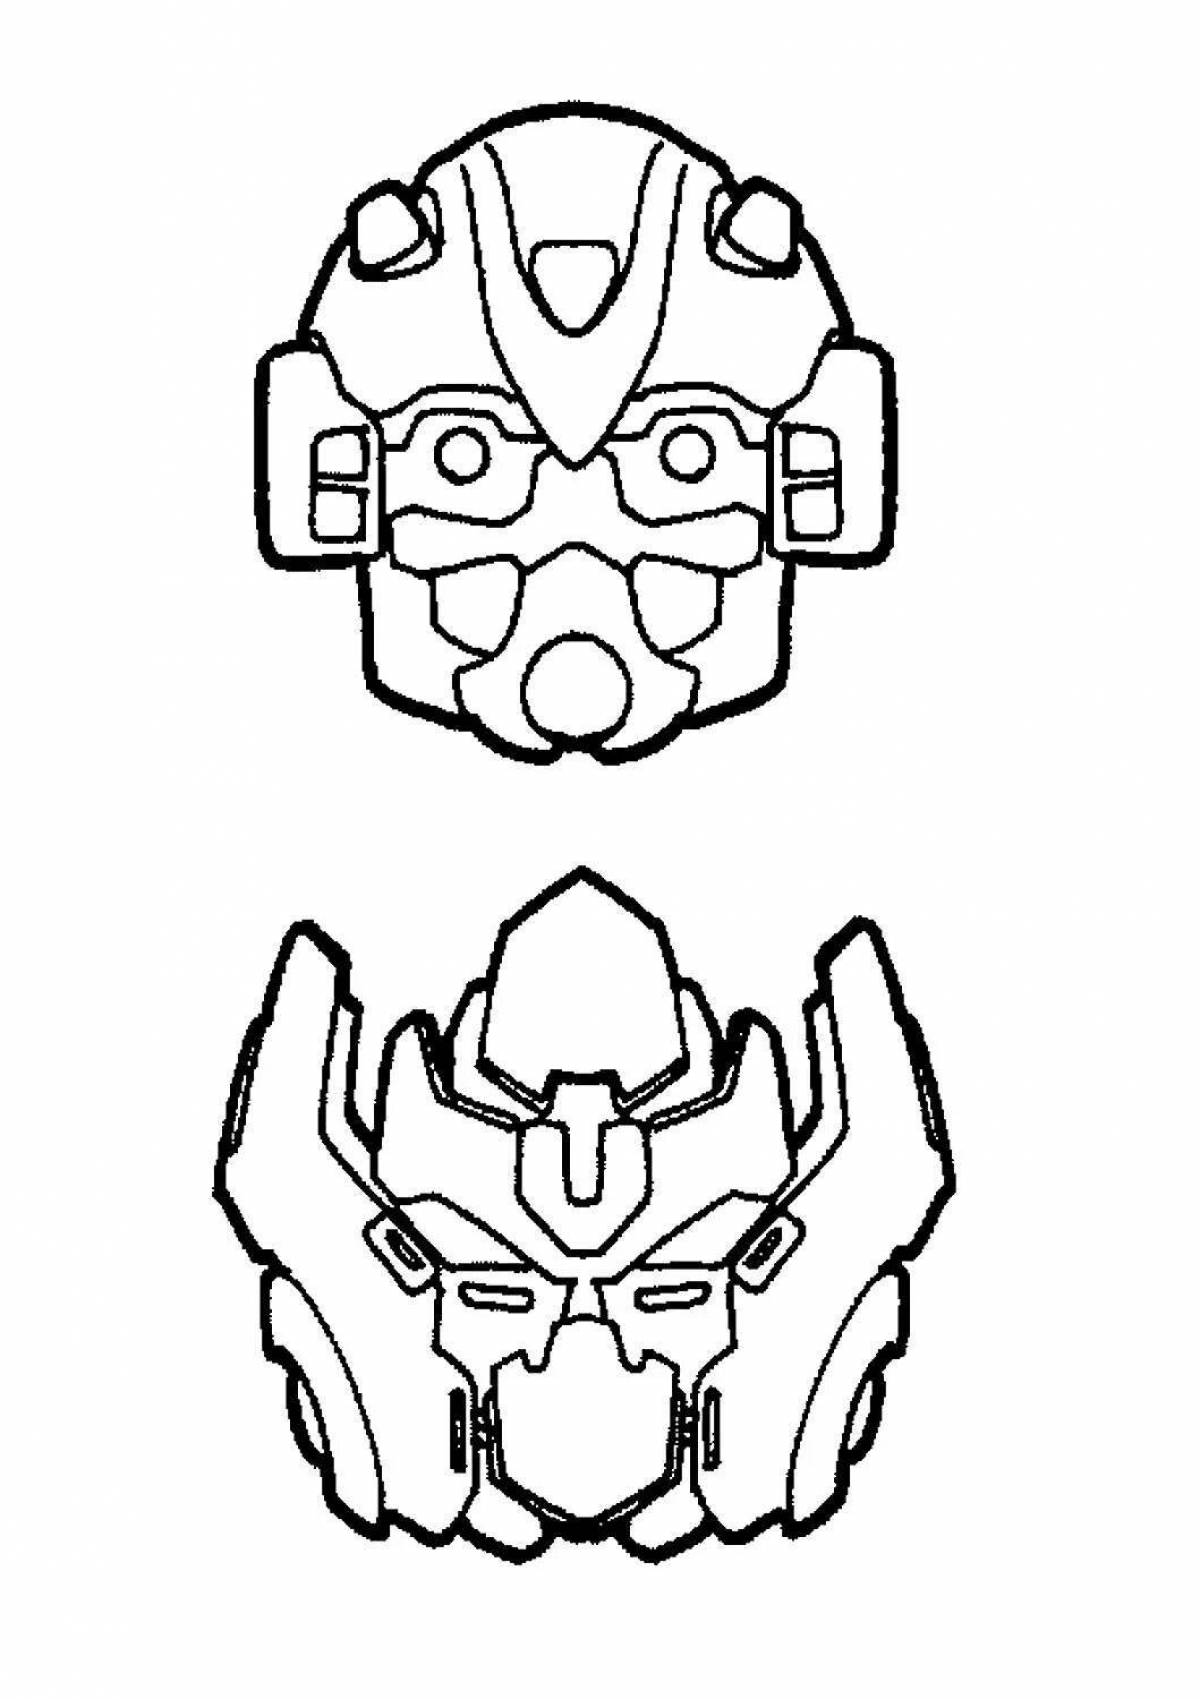 Exciting robot mask coloring book